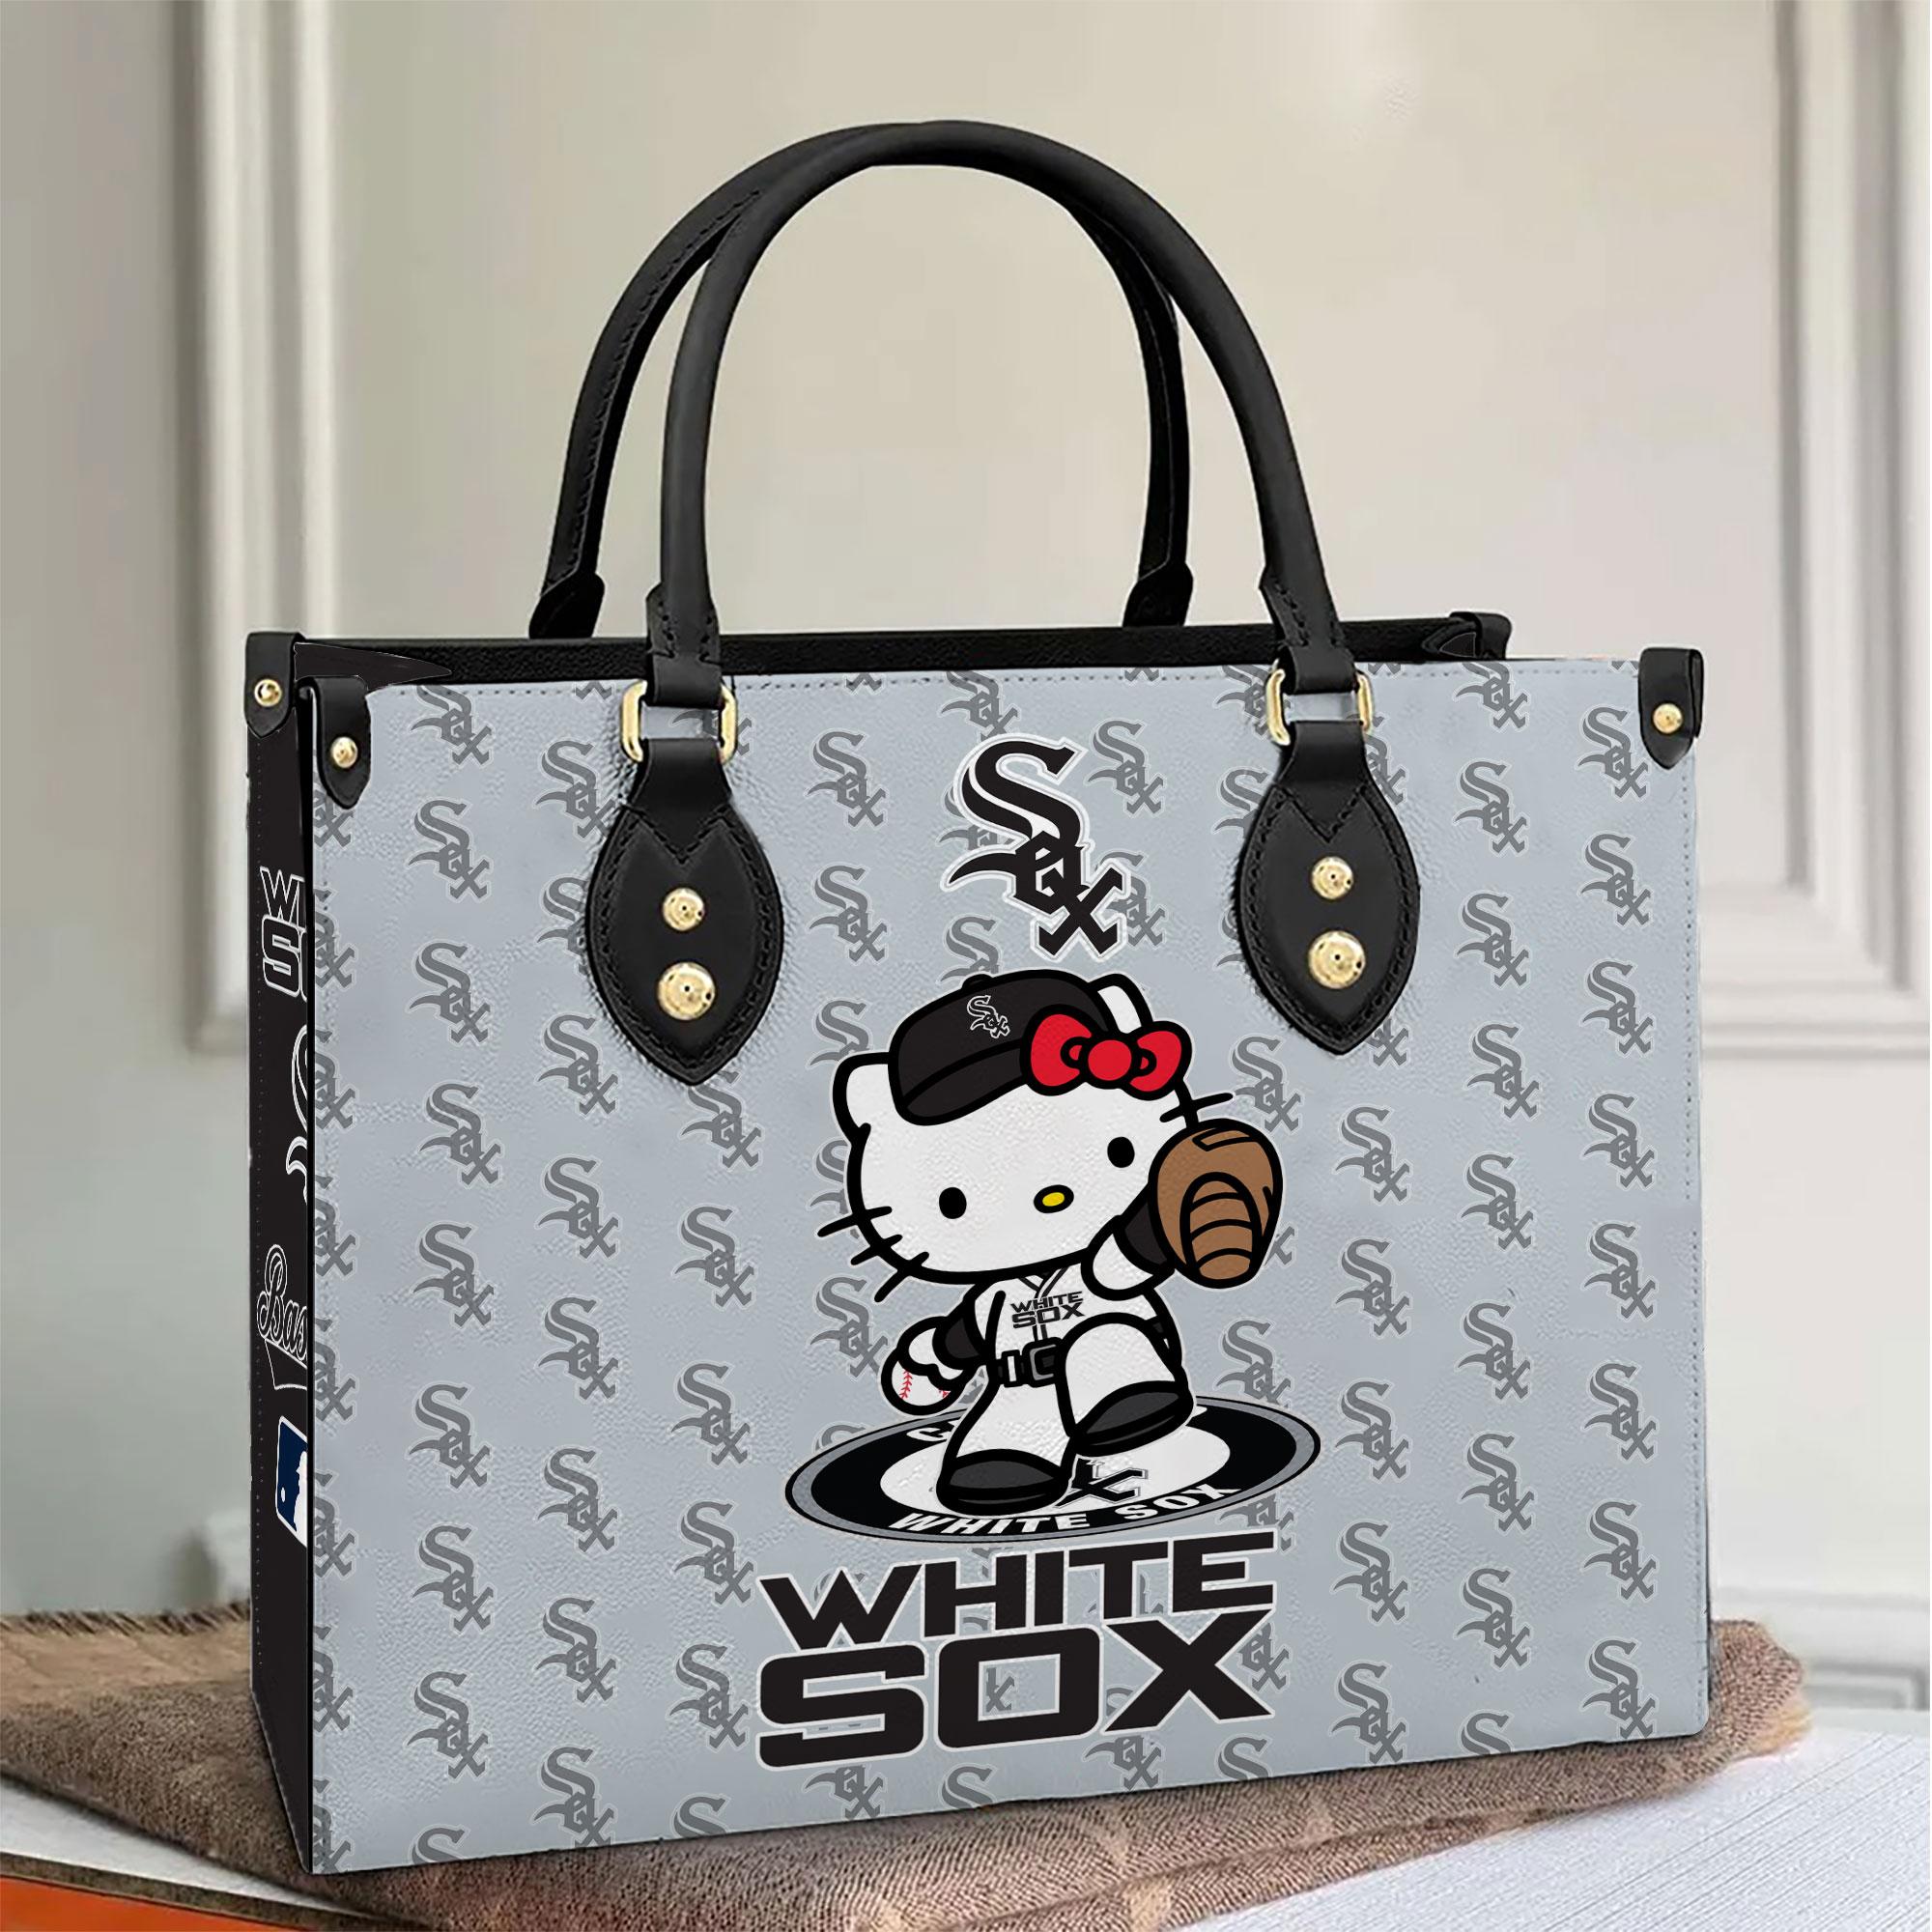 Chicago White Sox Kitty Women Leather Hand Bag M1 